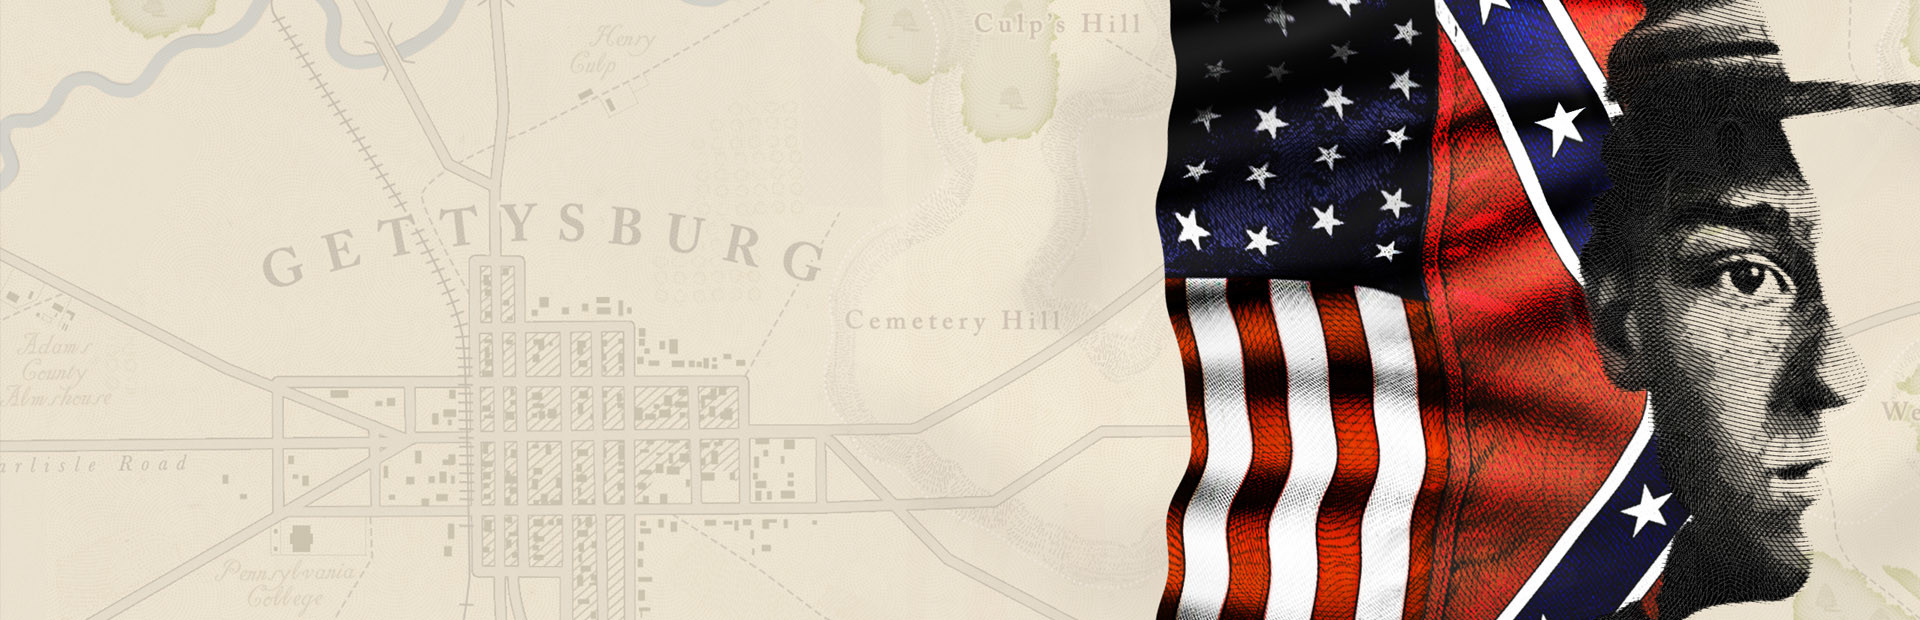 Gettysburg: The Tide Turns cover image